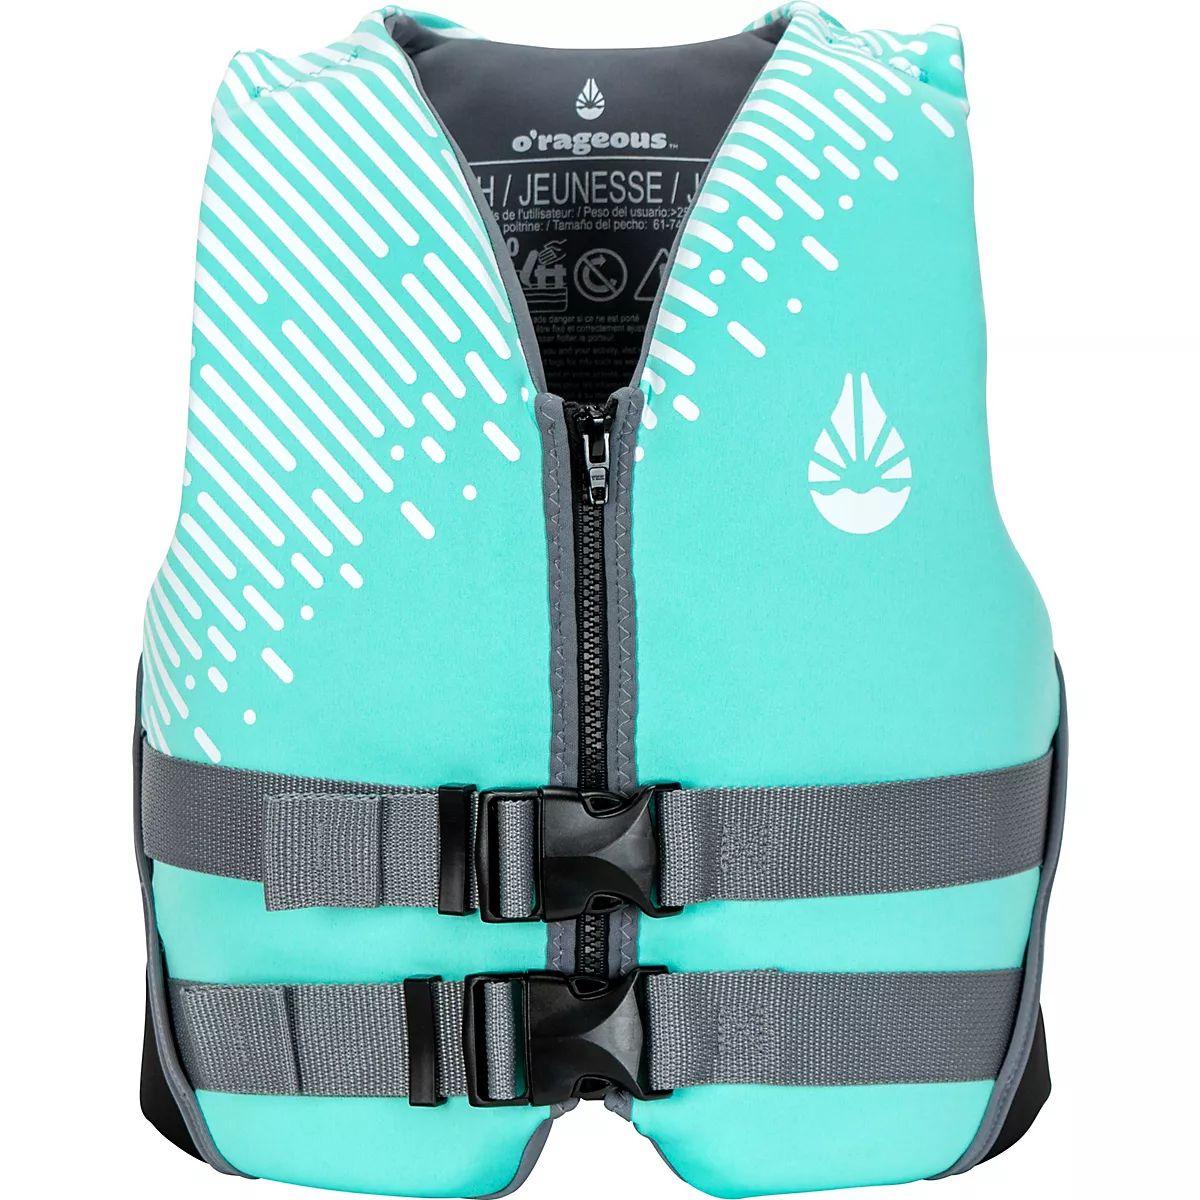 O'Rageous Youth Neoprene Life Vest | Academy Sports + Outdoors